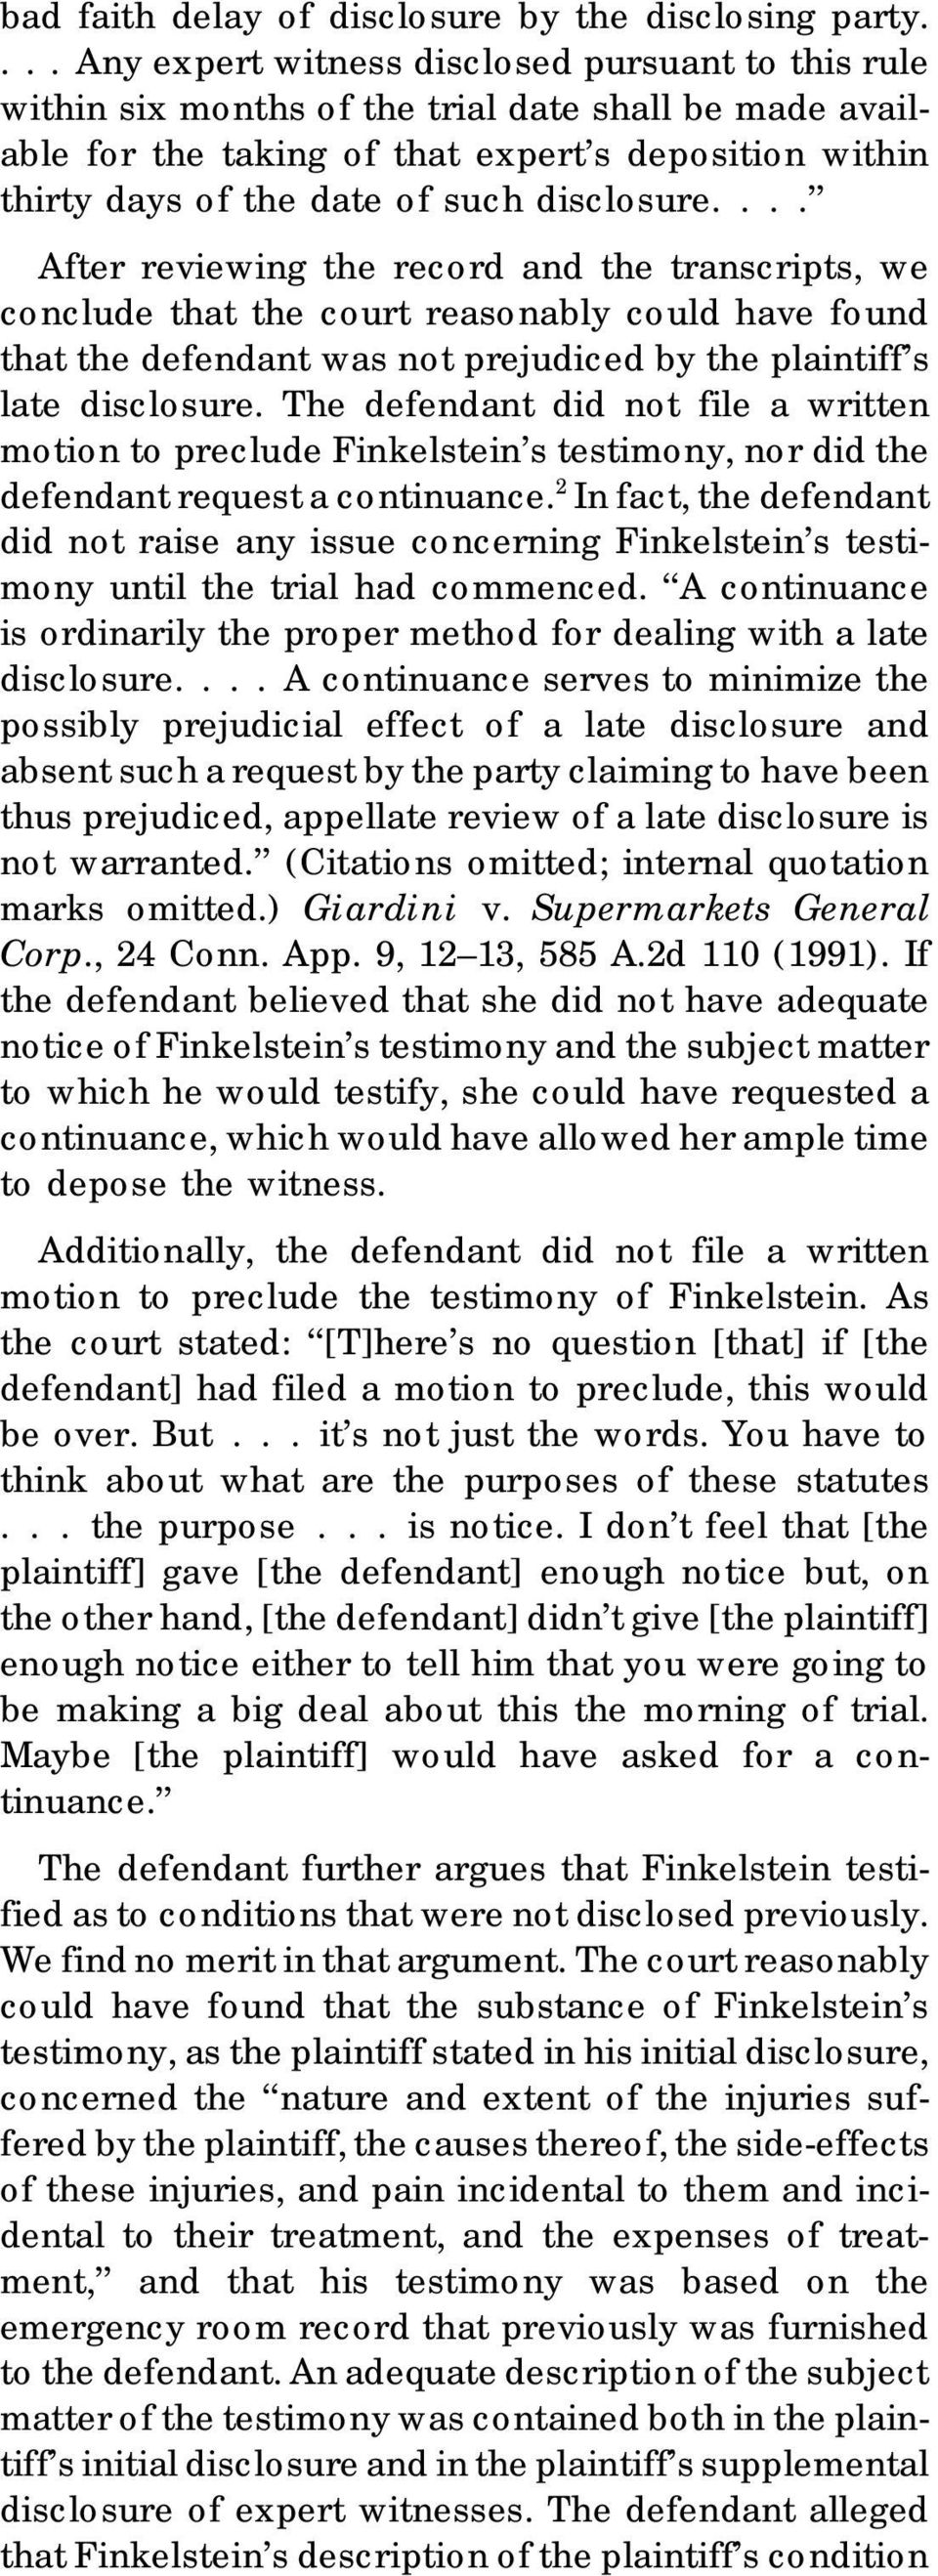 disclosure.... After reviewing the record and the transcripts, we conclude that the court reasonably could have found that the defendant was not prejudiced by the plaintiff s late disclosure.